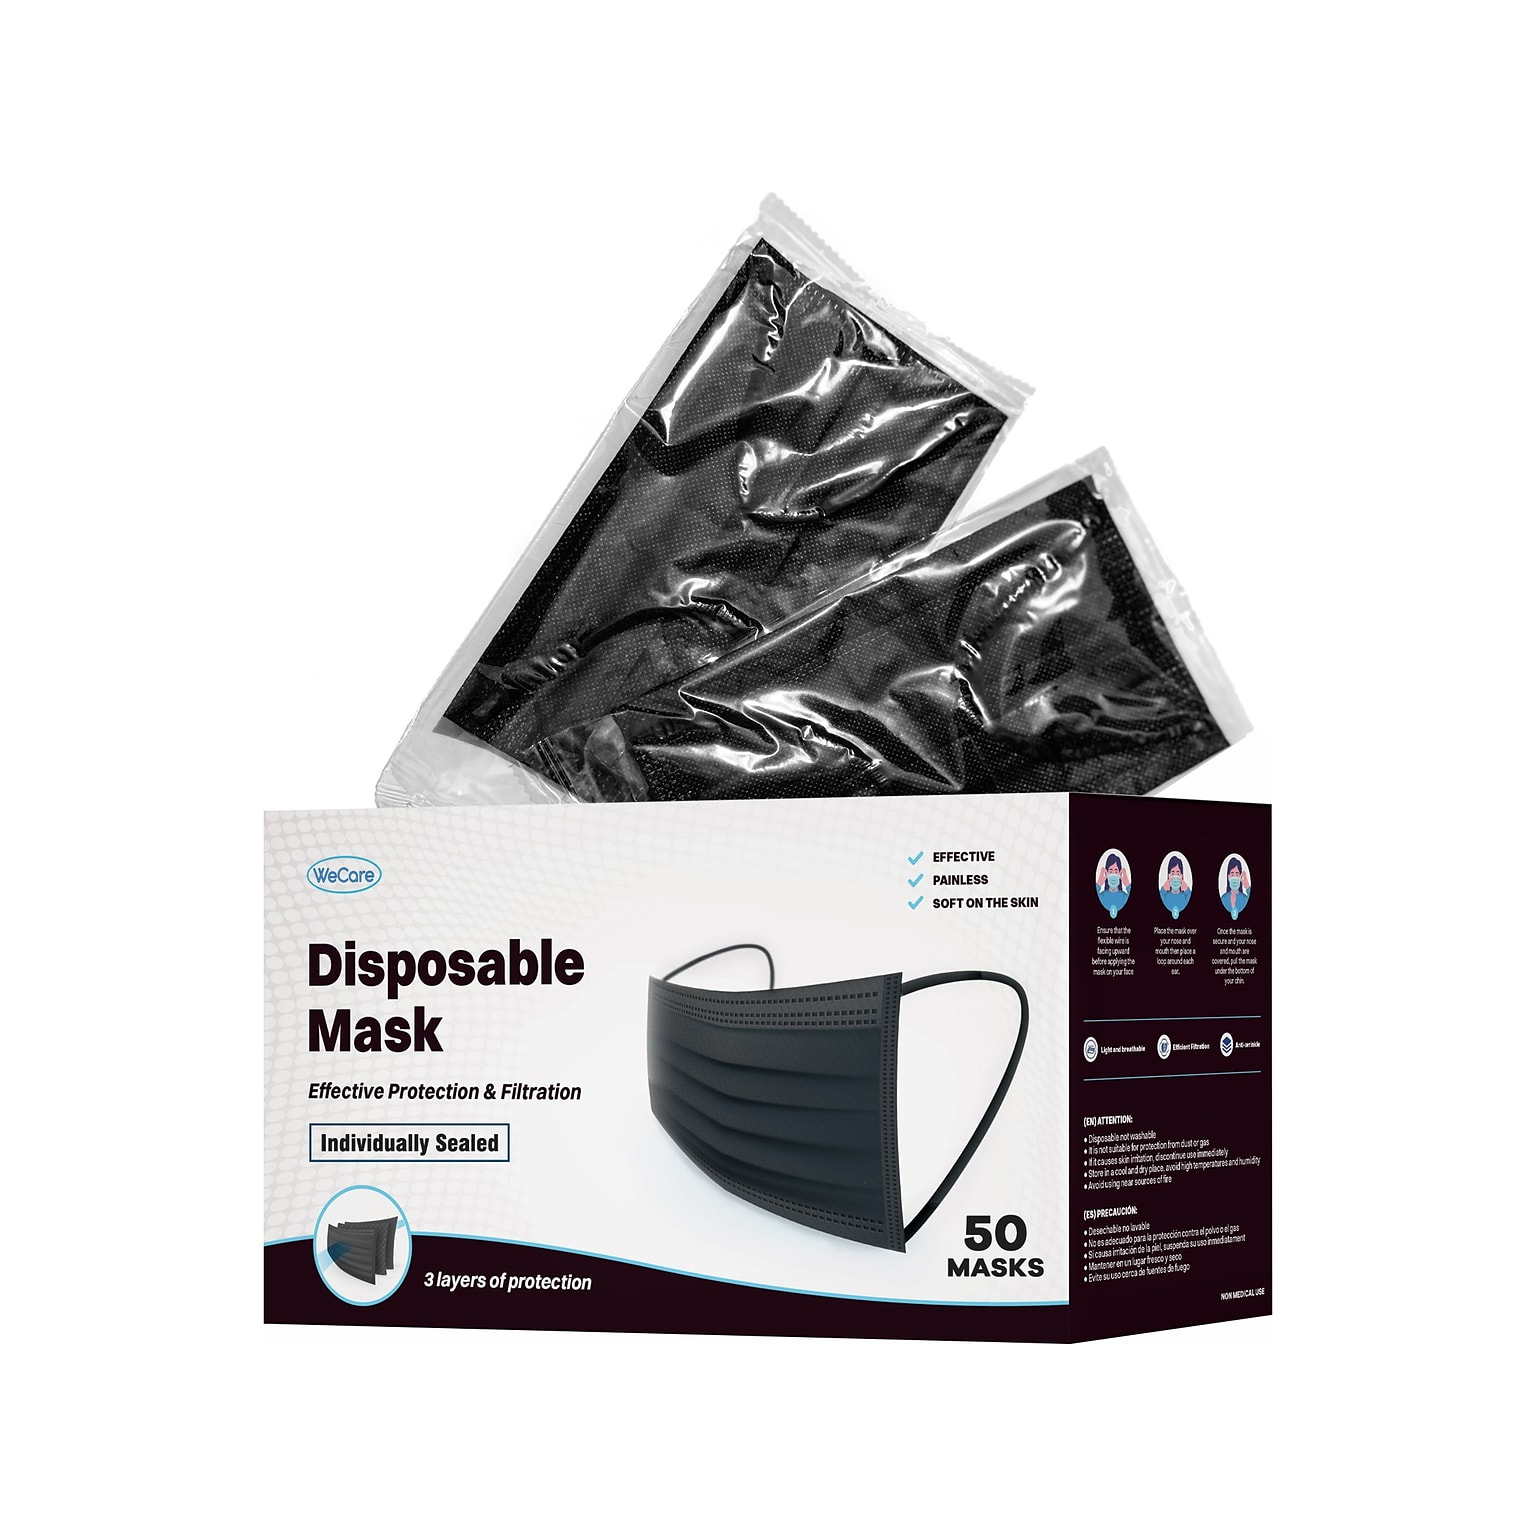 WeCare Disposable Face Mask, 3-Ply, Adult, Black, 50/Box (WMN100006)